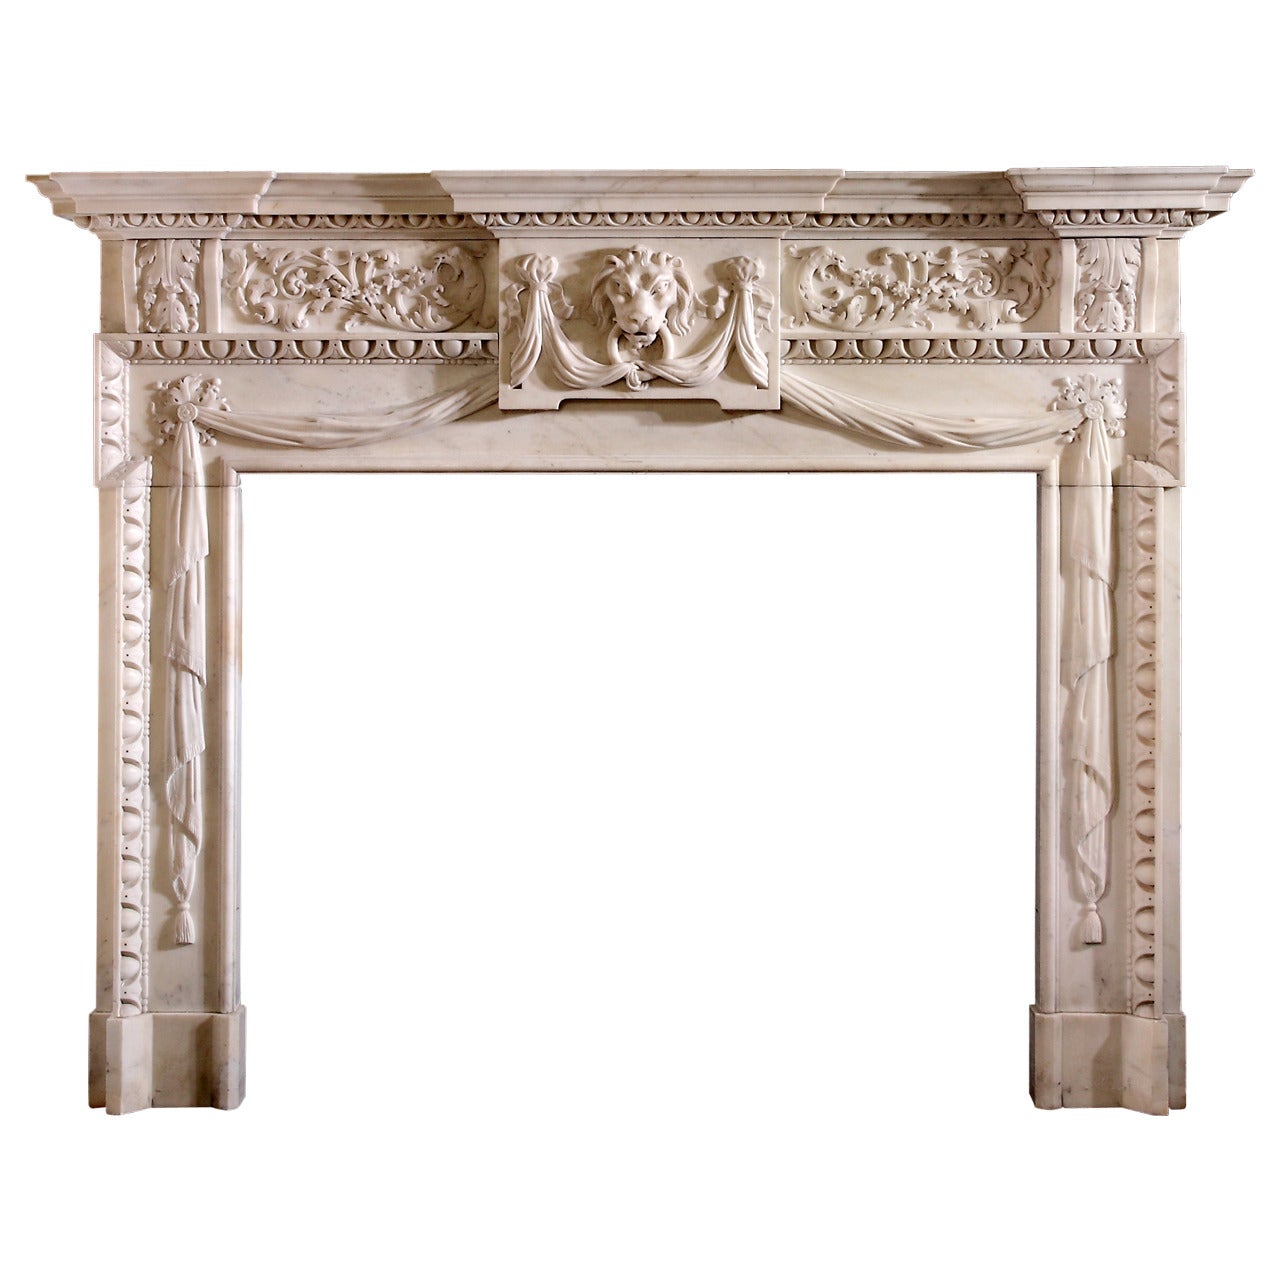 18th Century Palladian Mantel with Detail Carving and Rococo Influence